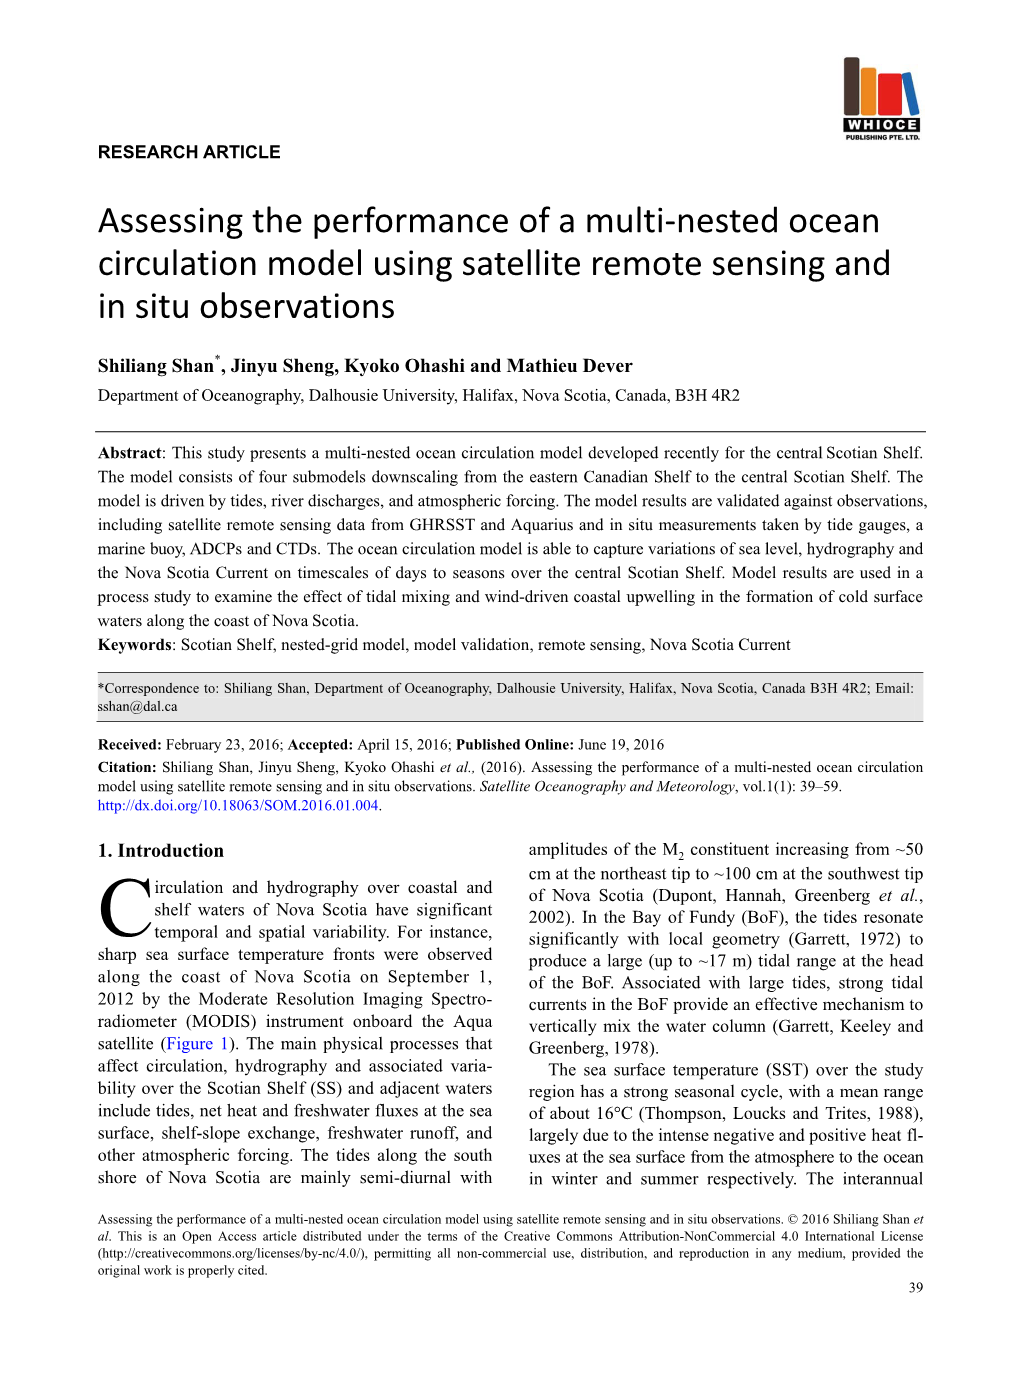 Assessing the Performance of a Multi-Nested Ocean Circulation Model Using Satellite Remote Sensing and in Situ Observations